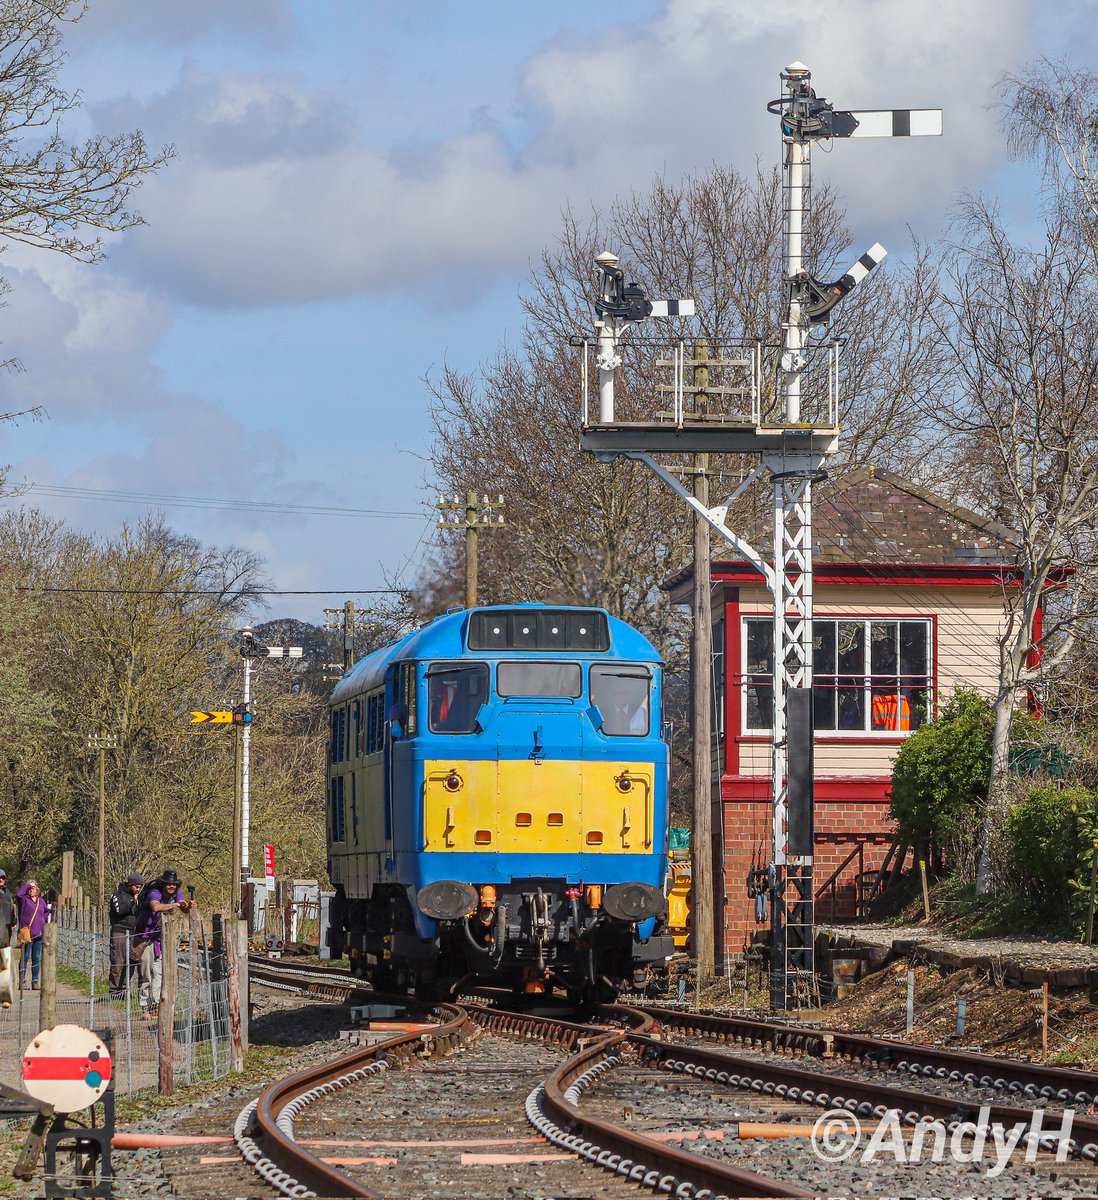 #FrontEndFriday One final 📸 from the @NLRailway last weekend. 31289 was working on the Saturday, sharing the passenger services & doing brake van rides, on the occasion of the southern extension opening. Seen here about to run back into Boughton station. #NLR #Class31 30/3/24